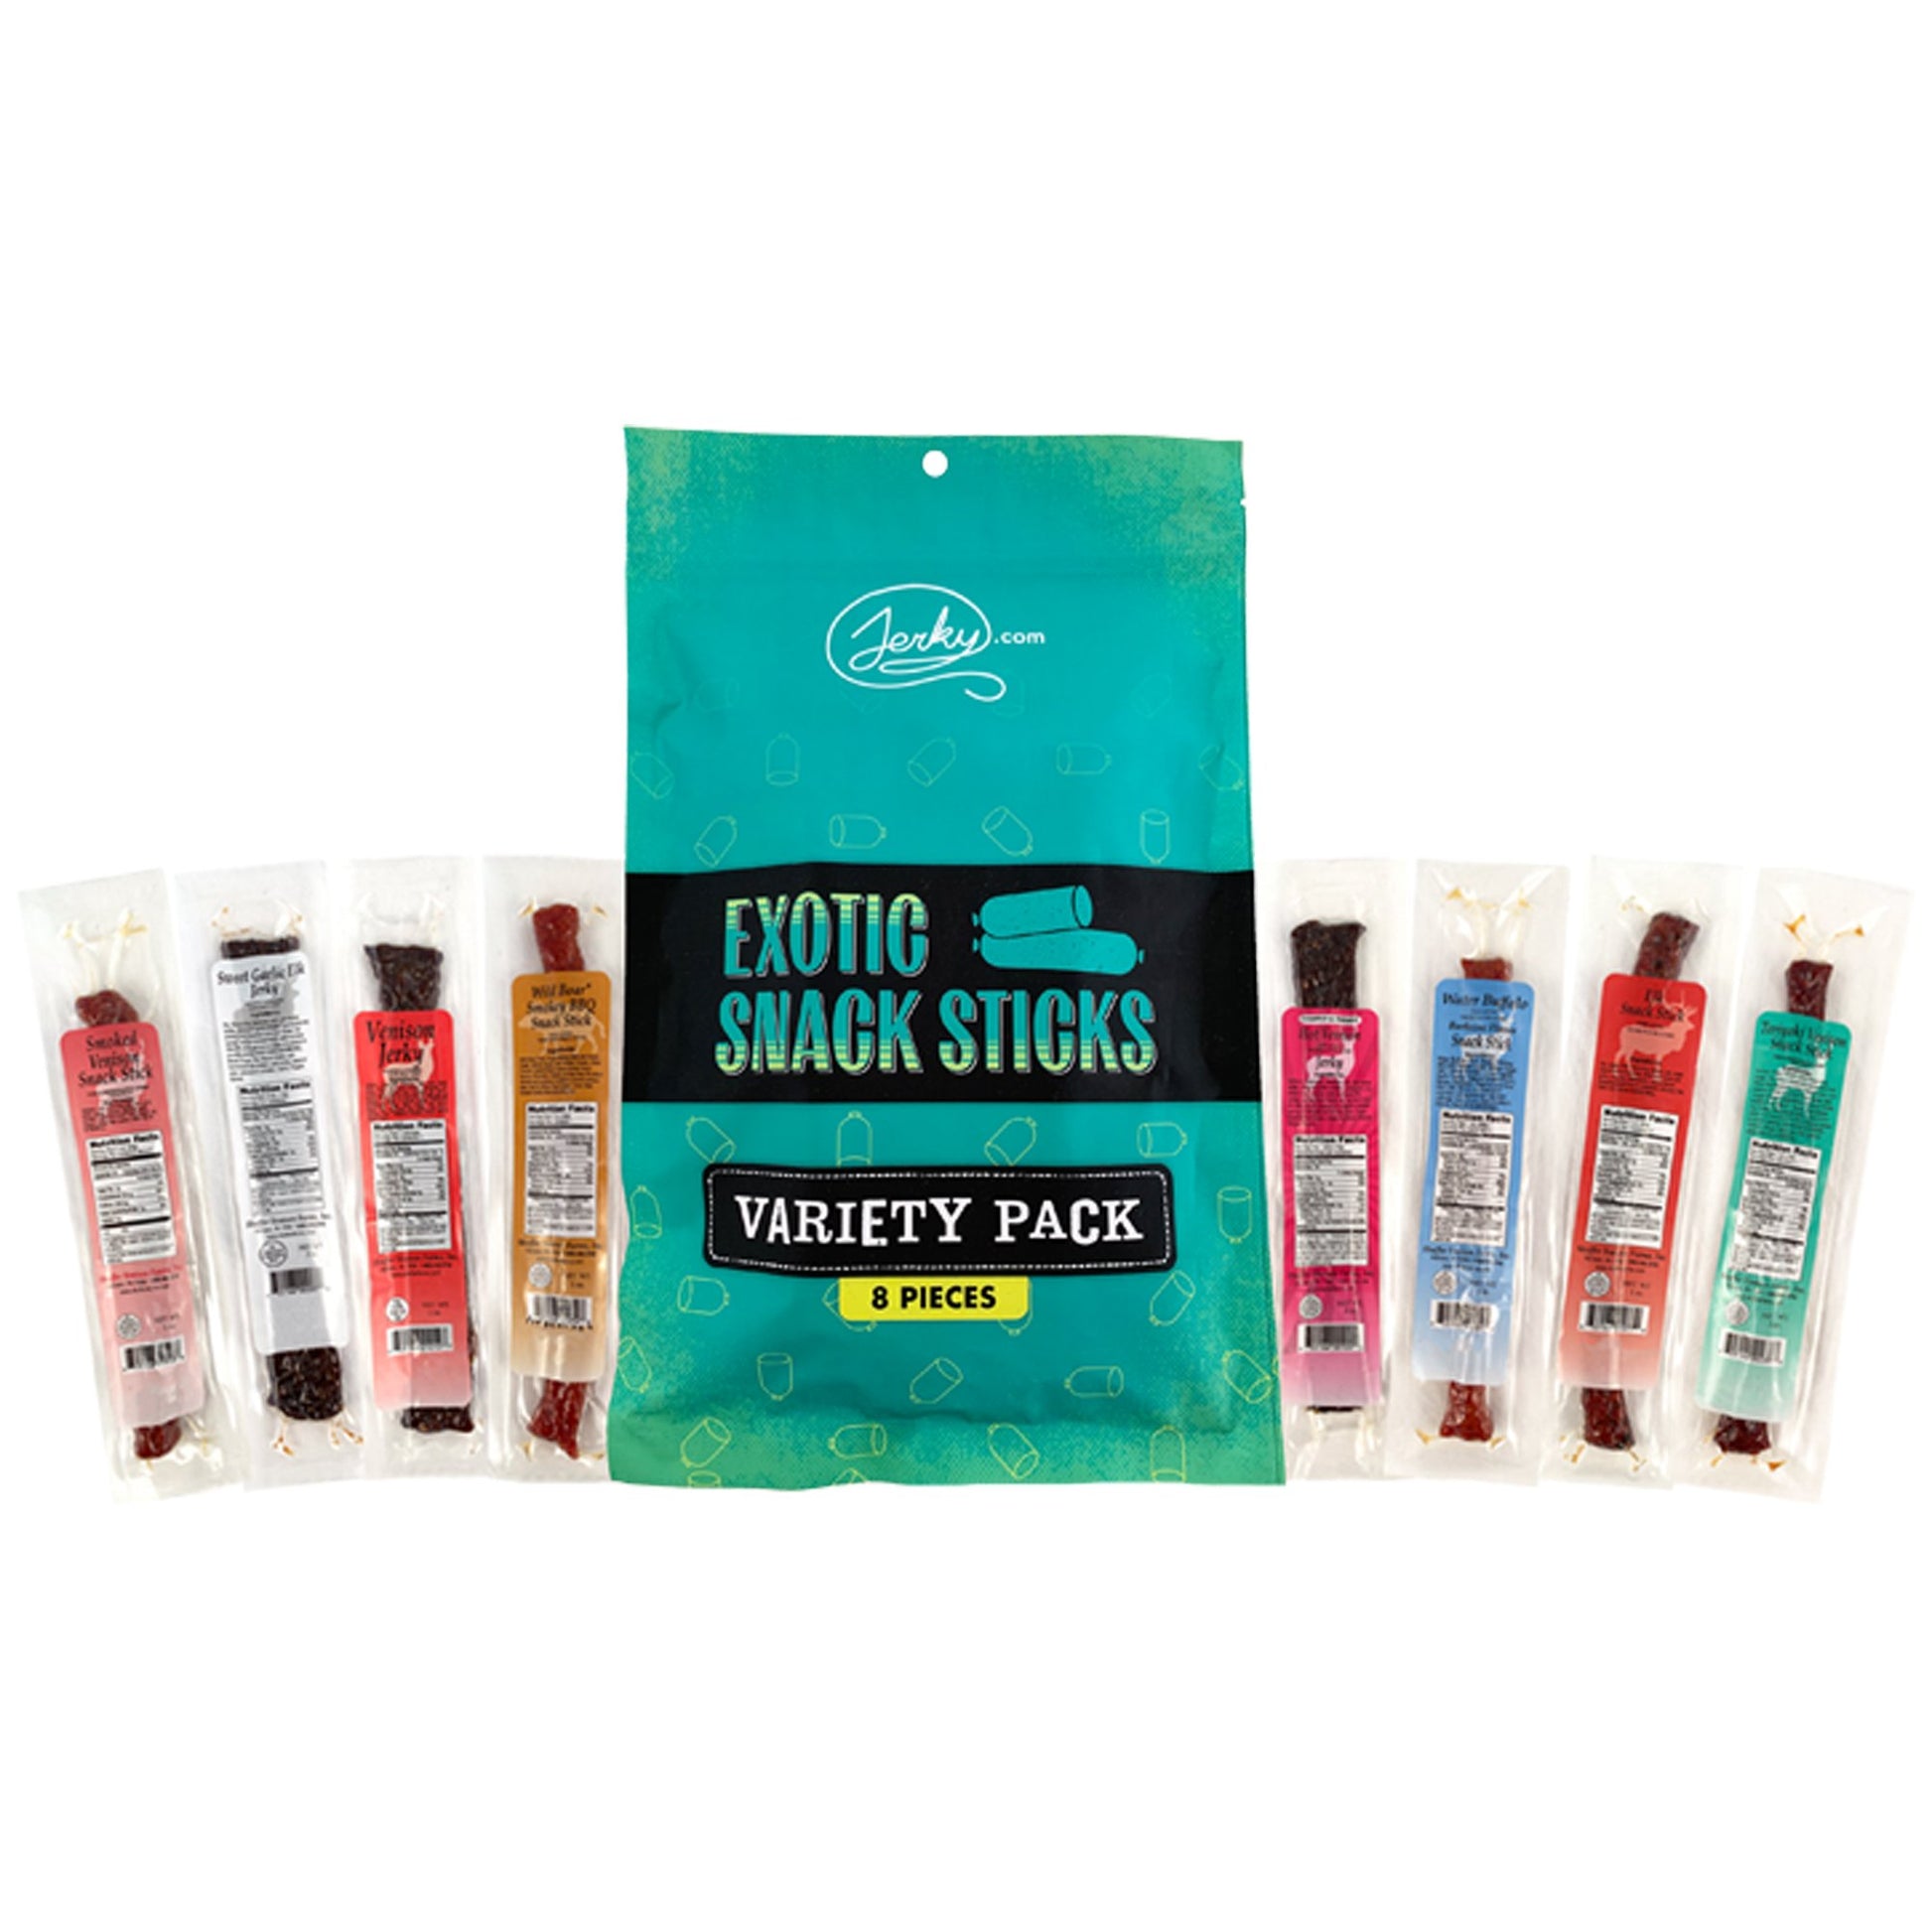 Exotic Snack Sticks Variety Pack - 8 Pieces by Jerky.com